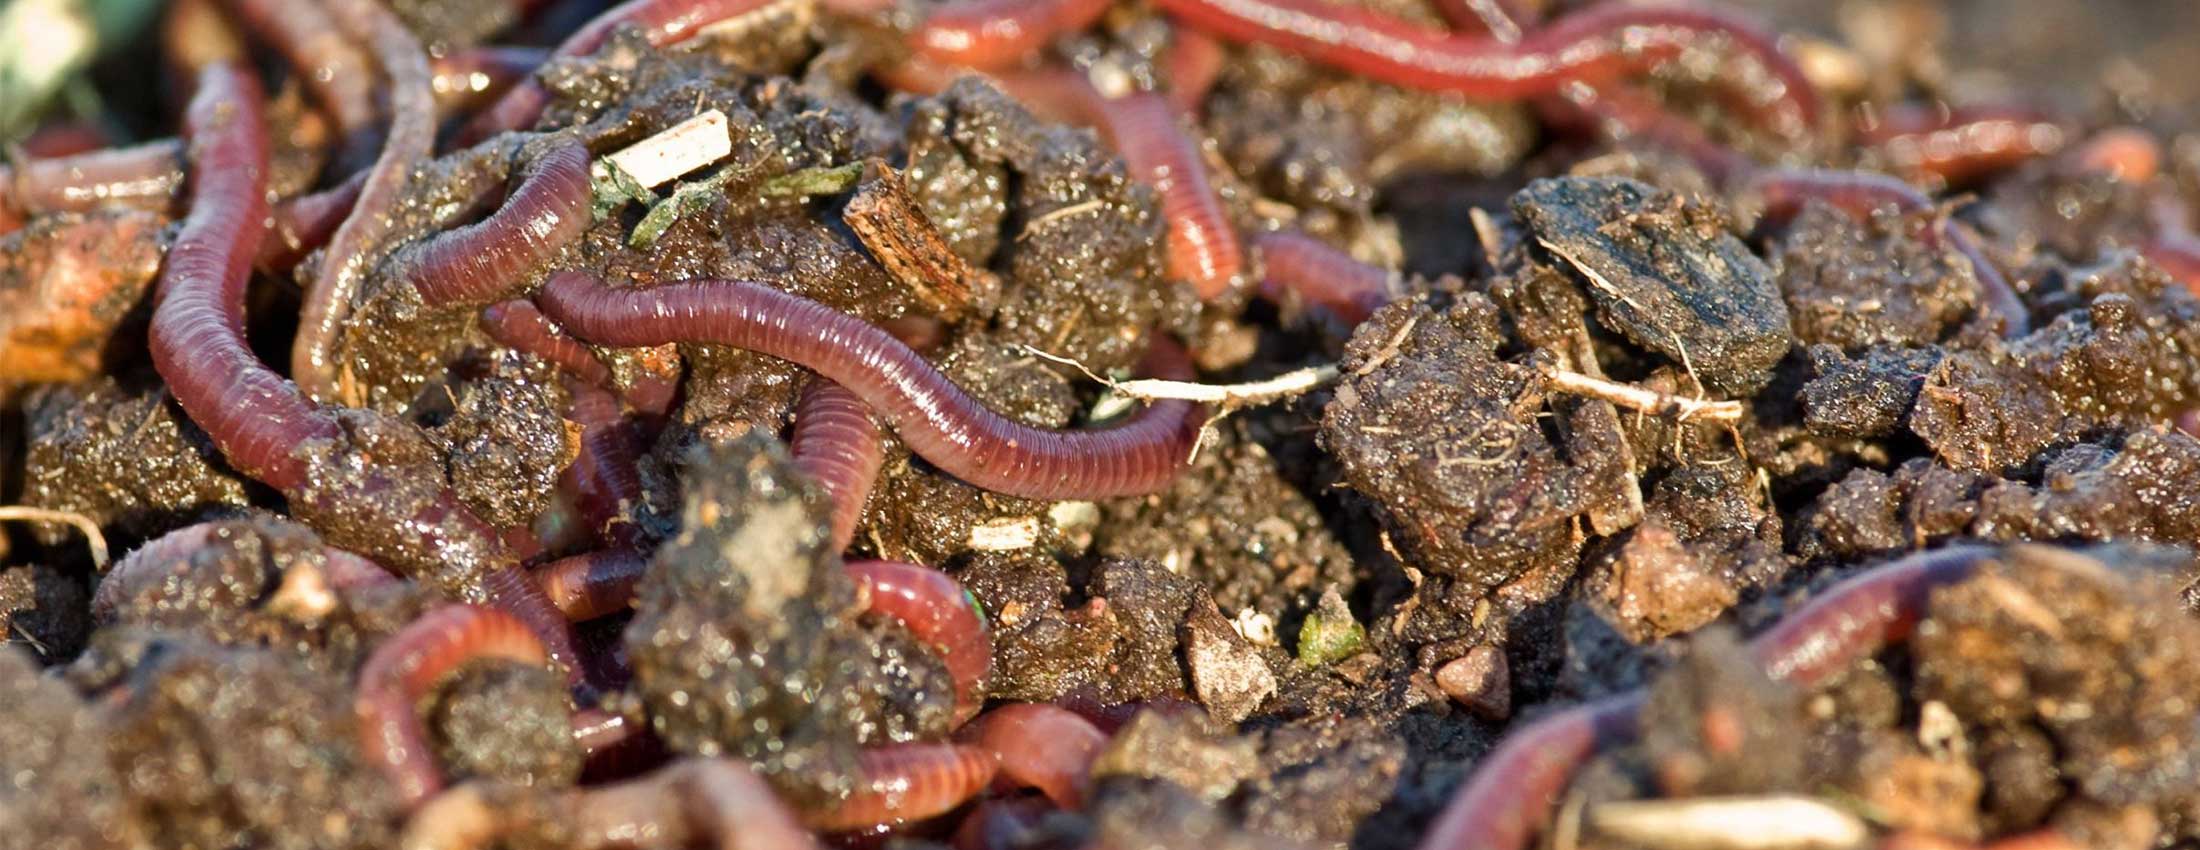 How to Make Your Garden a Worm Paradise